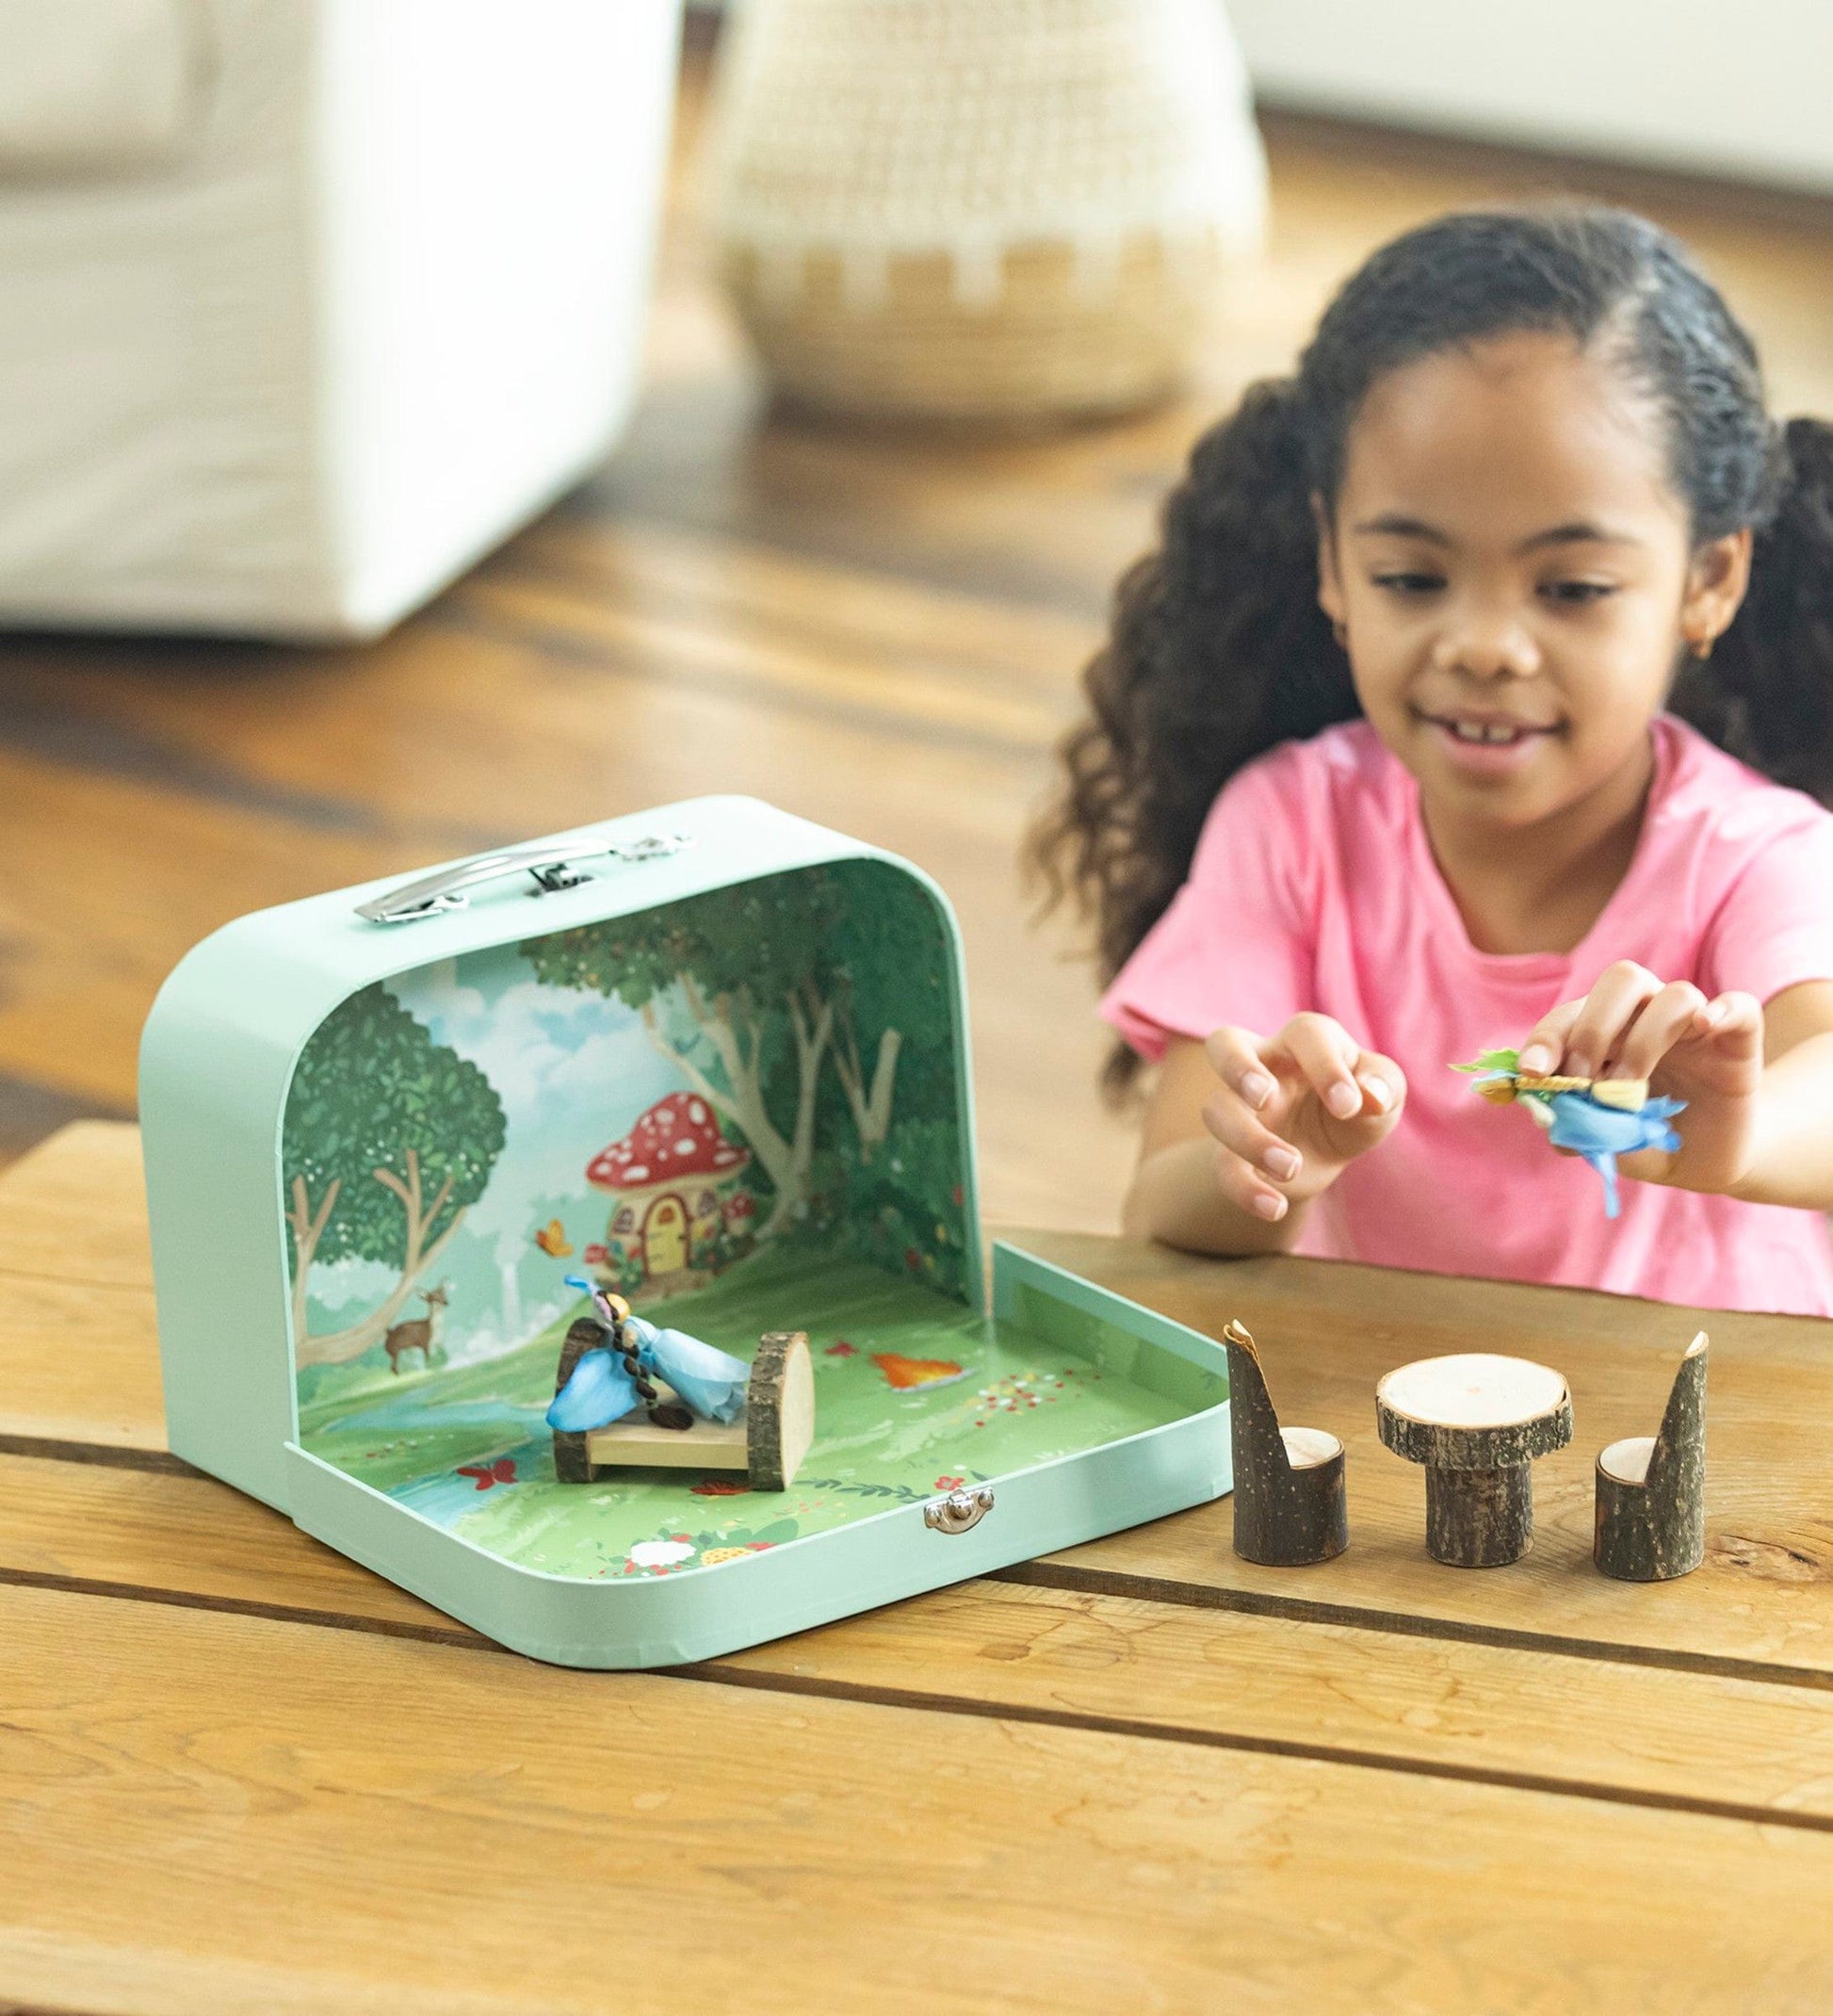 Wooden Dollhouse with Turntable and 35-Piece Furniture Set – Hearthsong